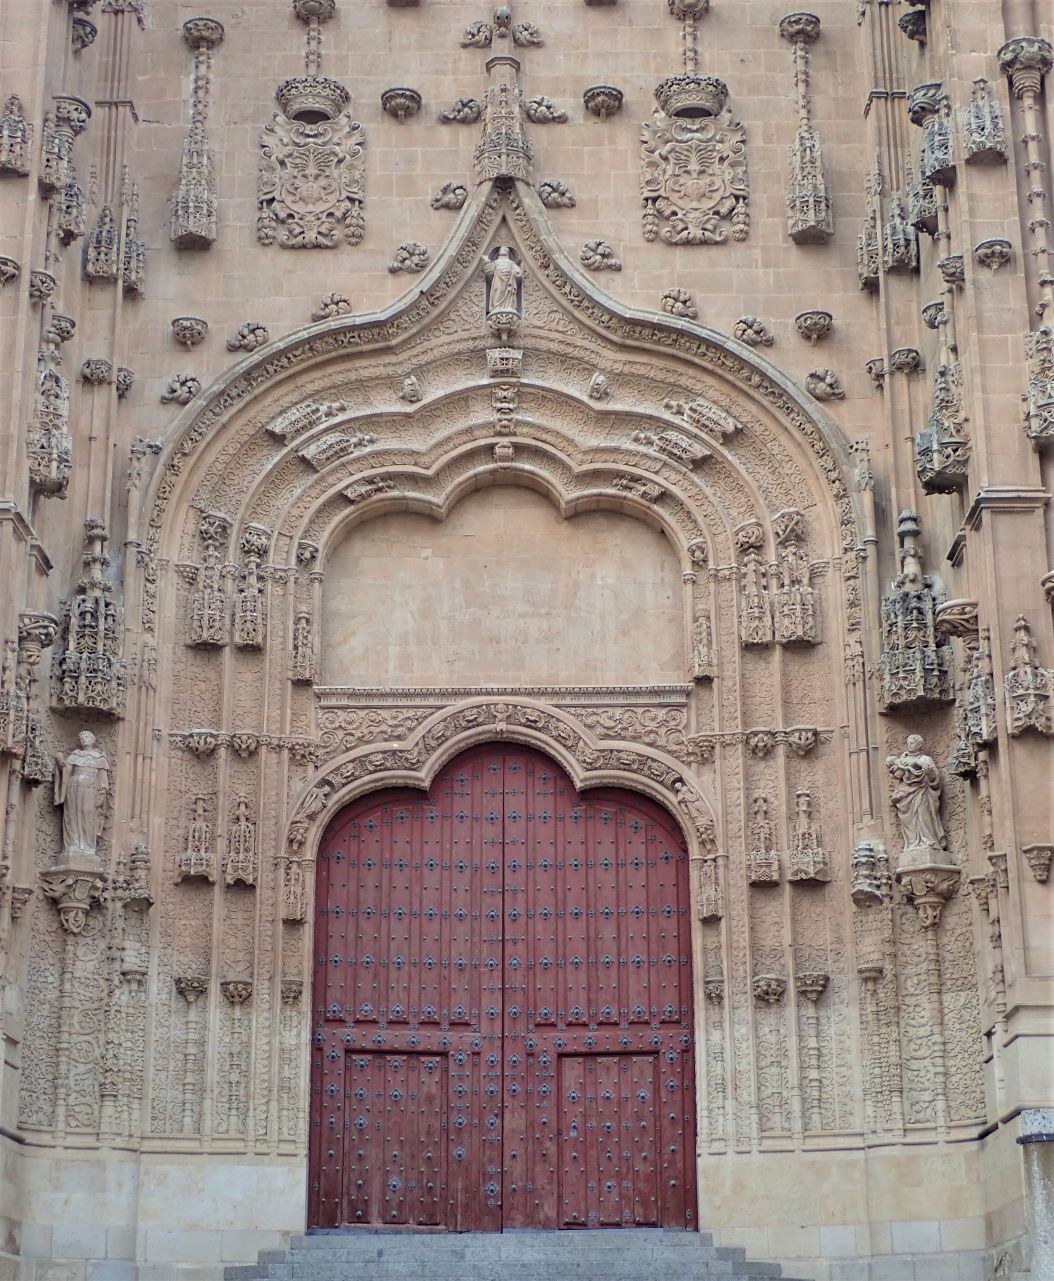 One of the ornate entrances to the New Cathedral in Salamanca, Spain